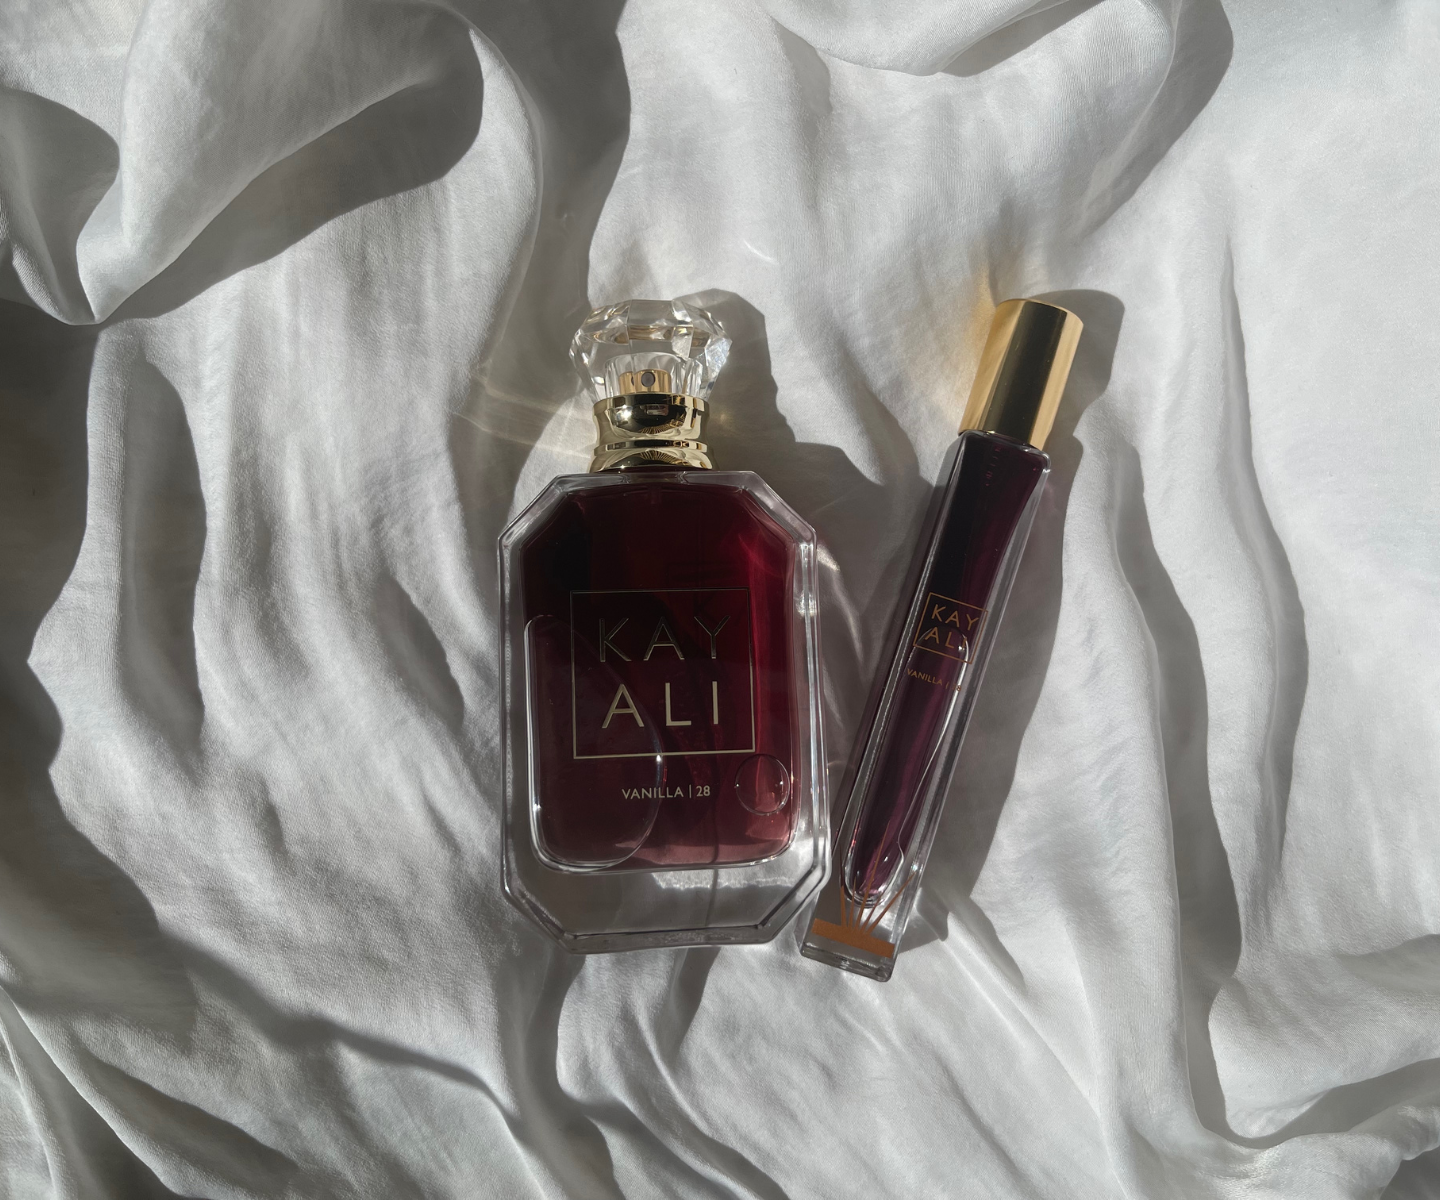 We Tried the TikTok-Famous Kayali Vanilla Fragrance That's Almost